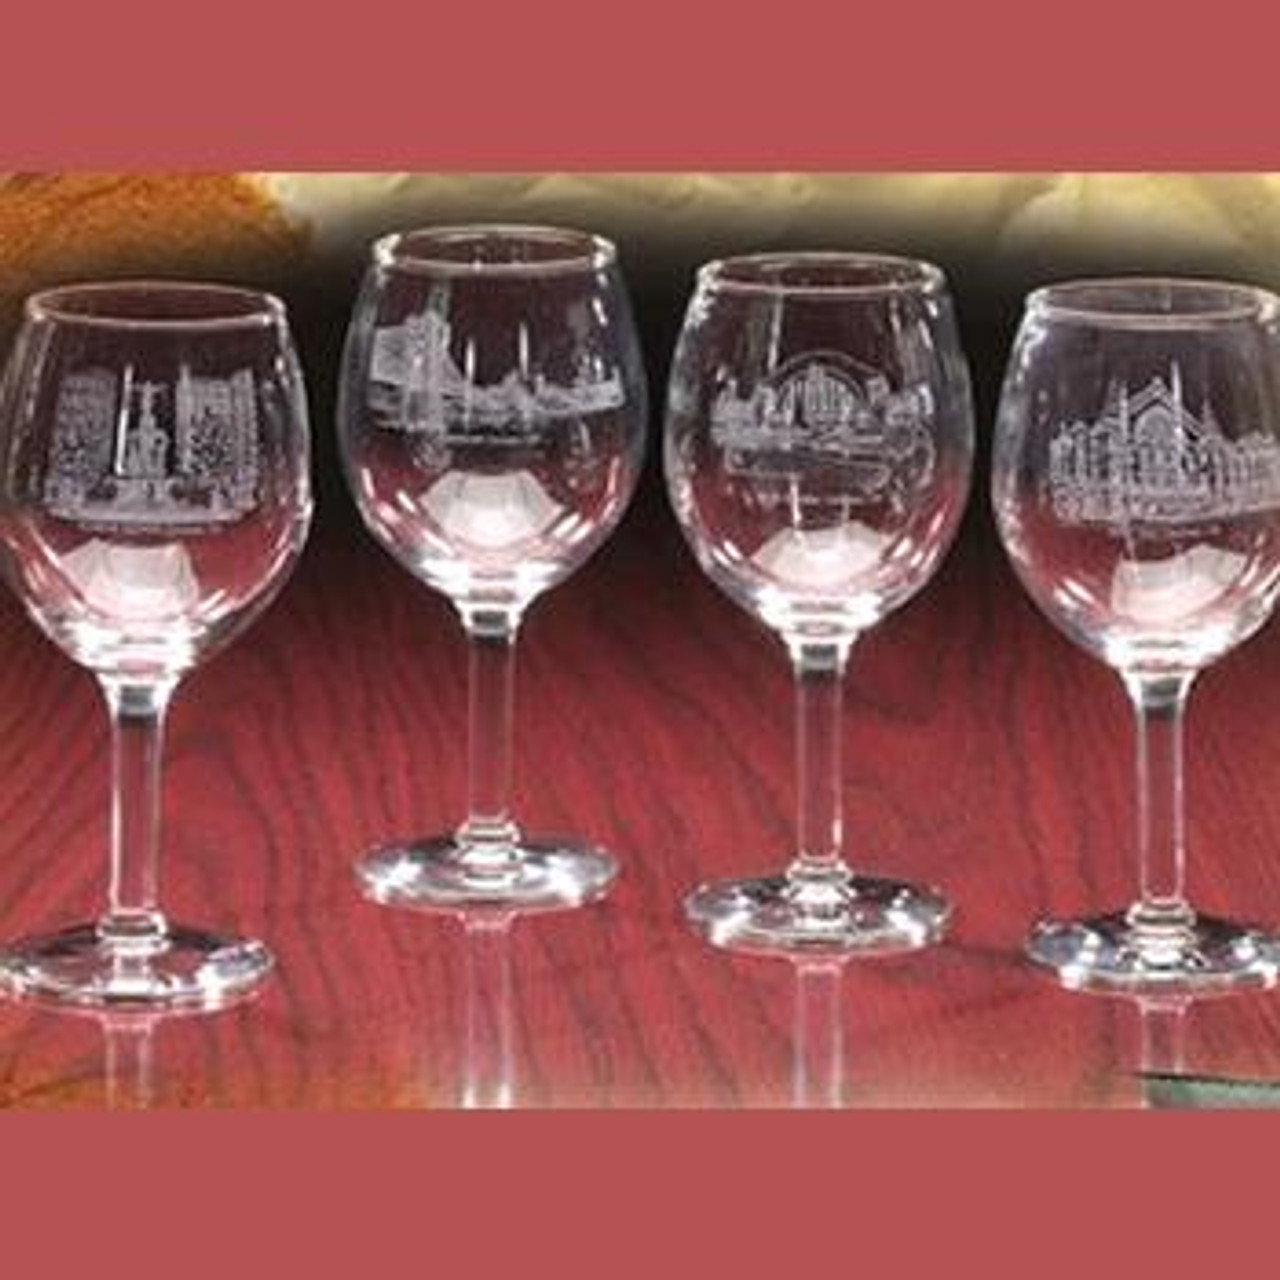 https://cdn11.bigcommerce.com/s-sz8cmetala/images/stencil/1280x1280/products/130/615/wine-glasses-with-stems__59602.1631284709.jpg?c=2